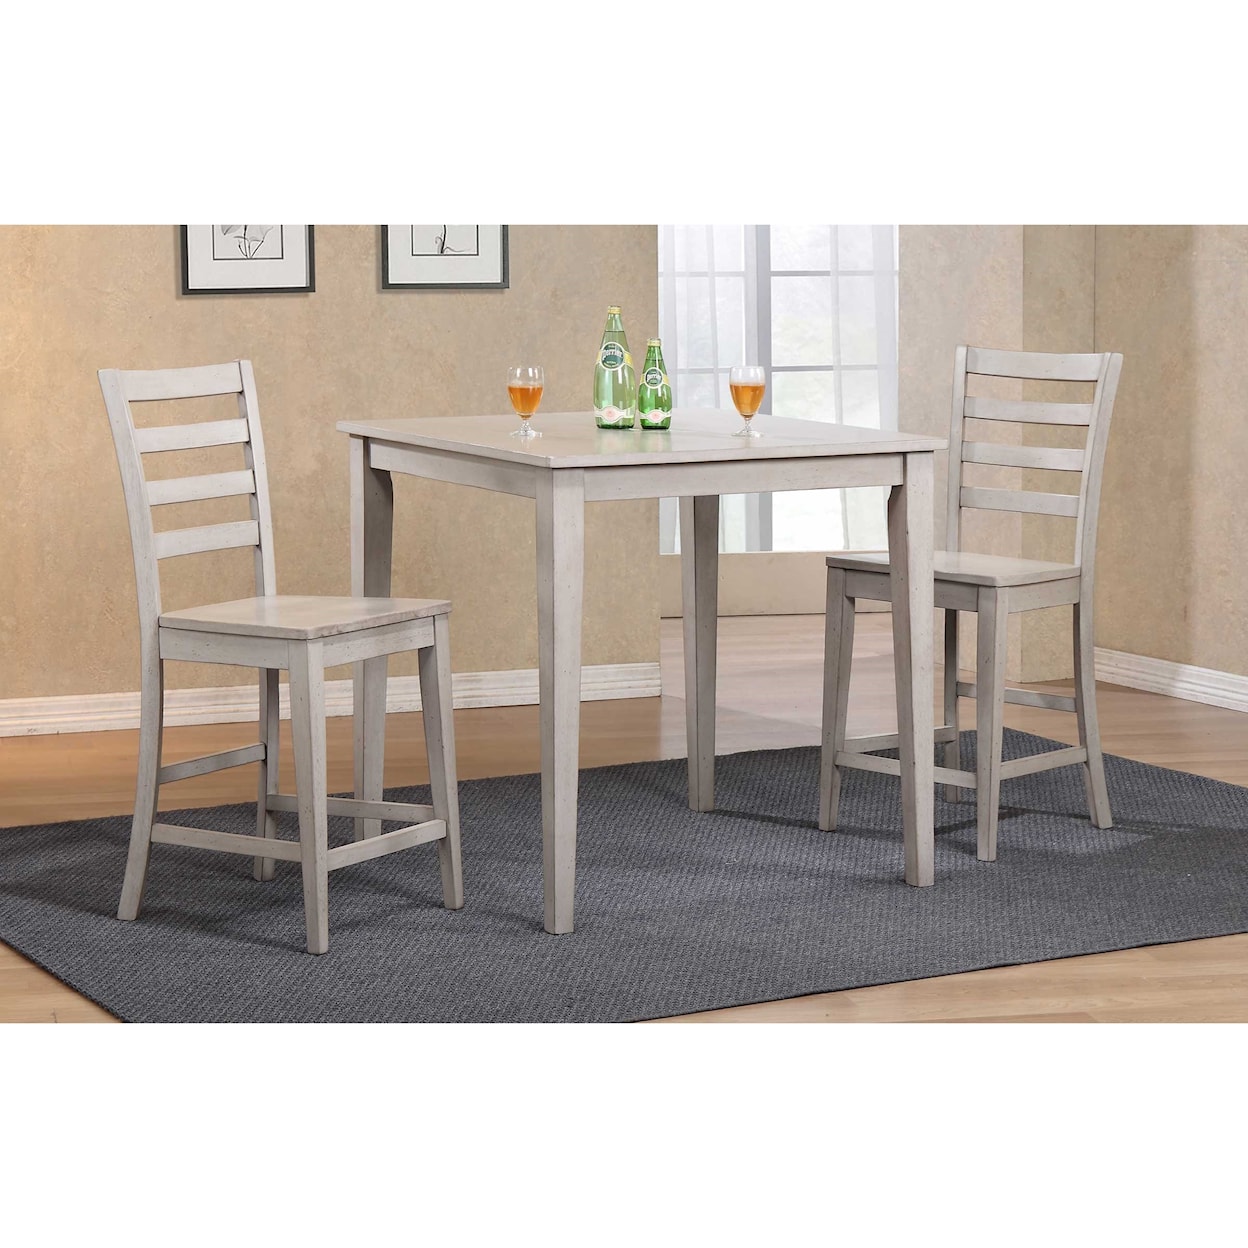 Winners Only Carmel 3-Piece Counter Height Dining Set